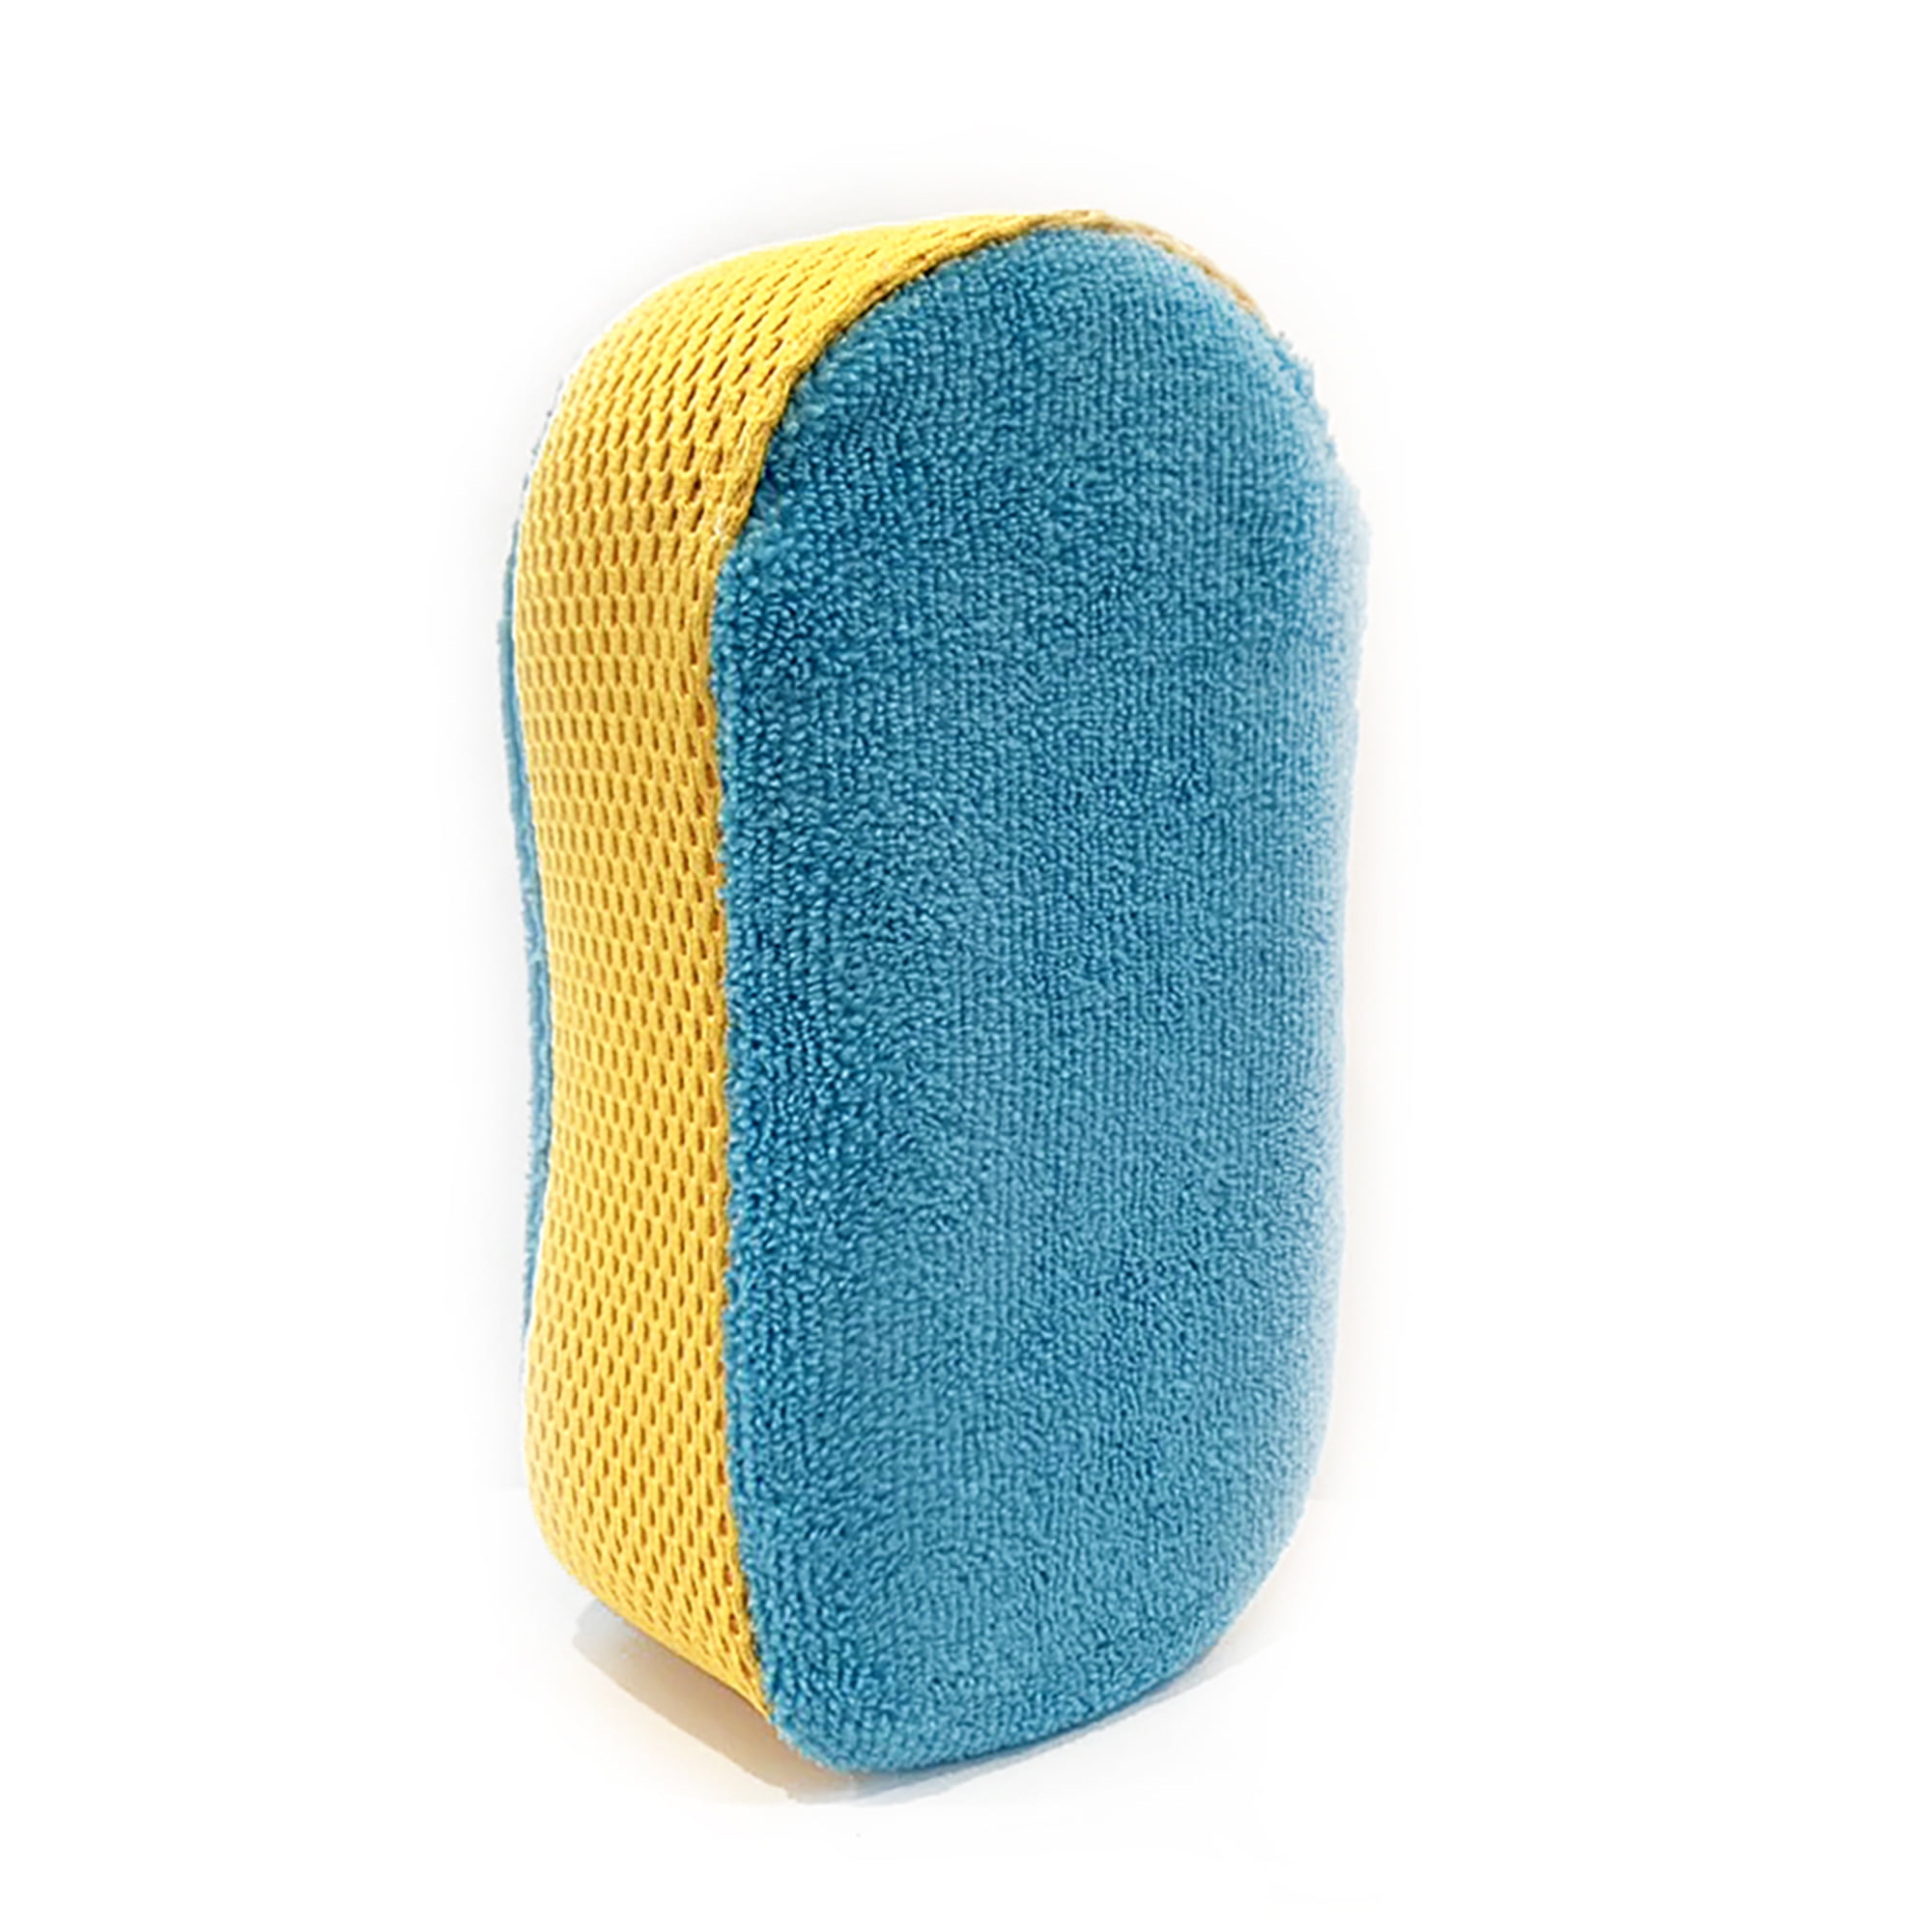 Window mate defog sponge - car care products supplier in China